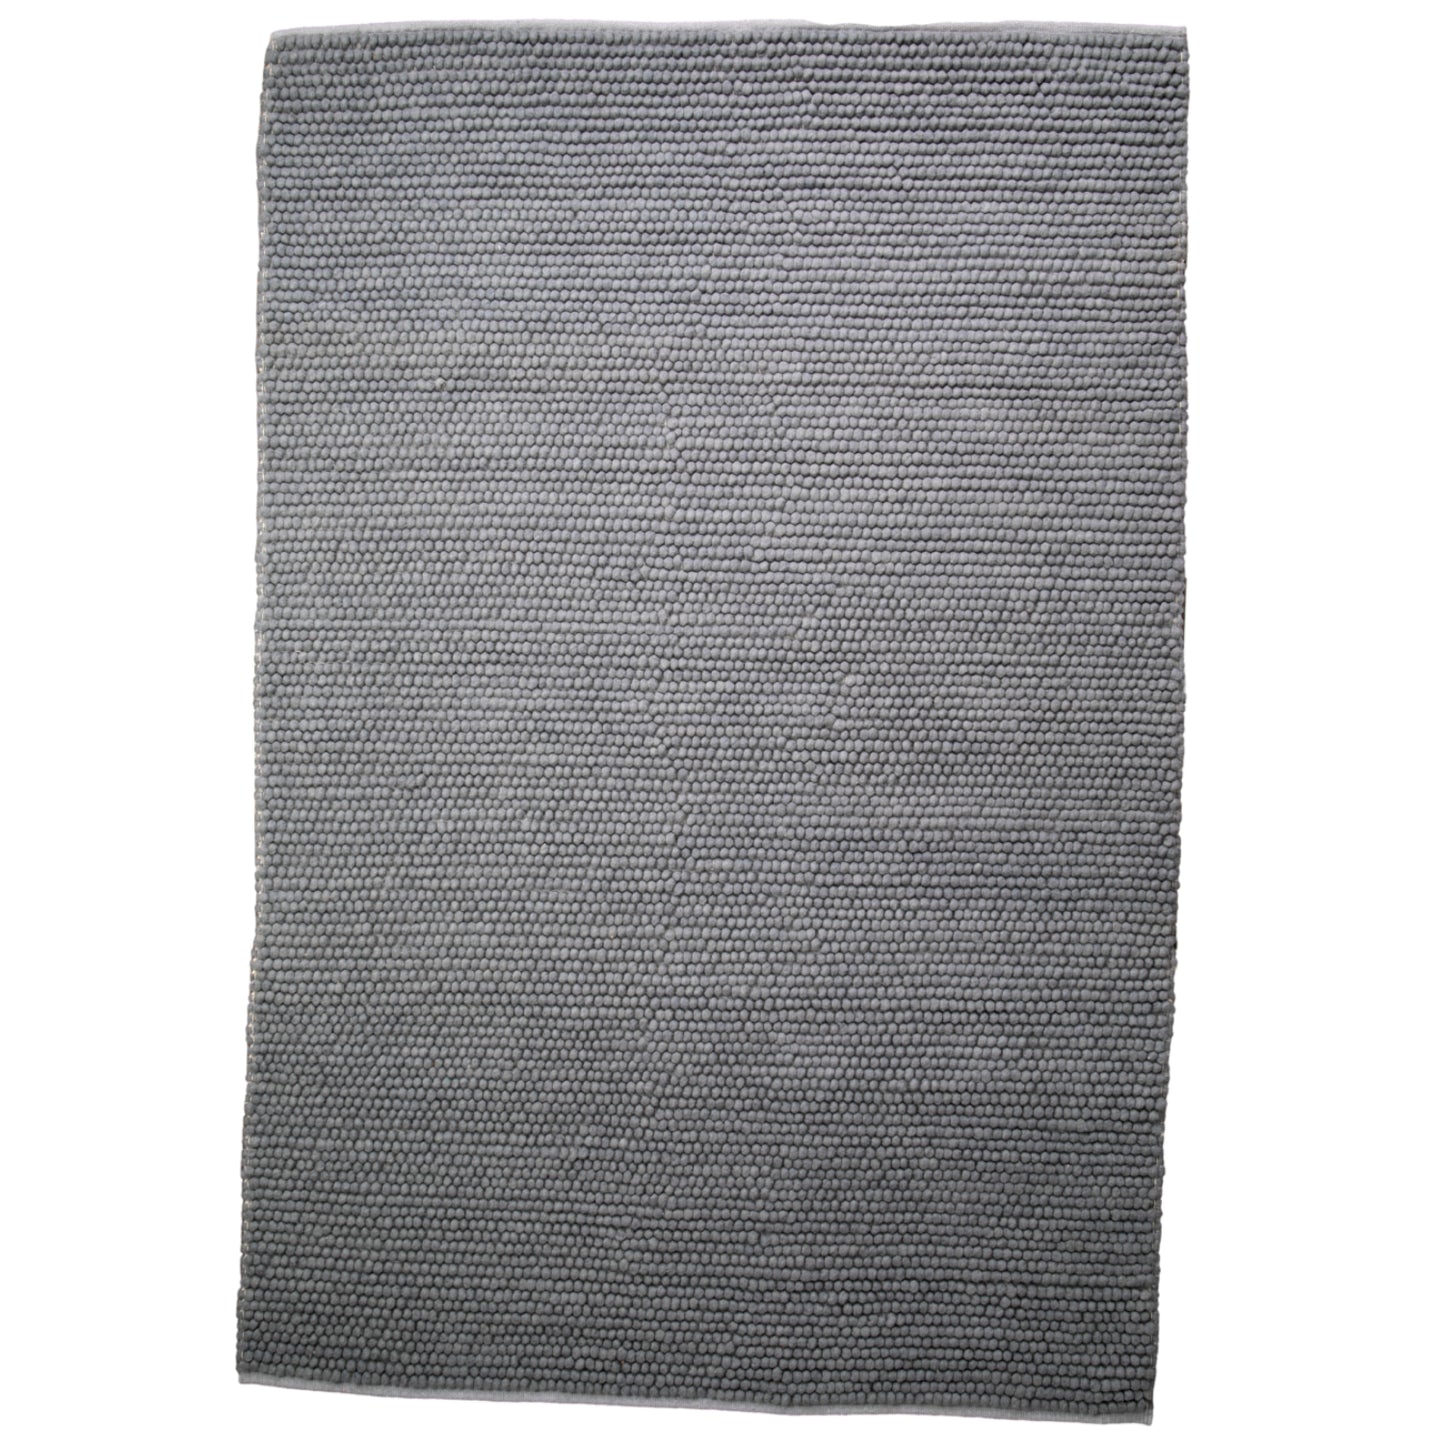 Grey bubble wool rug by Native